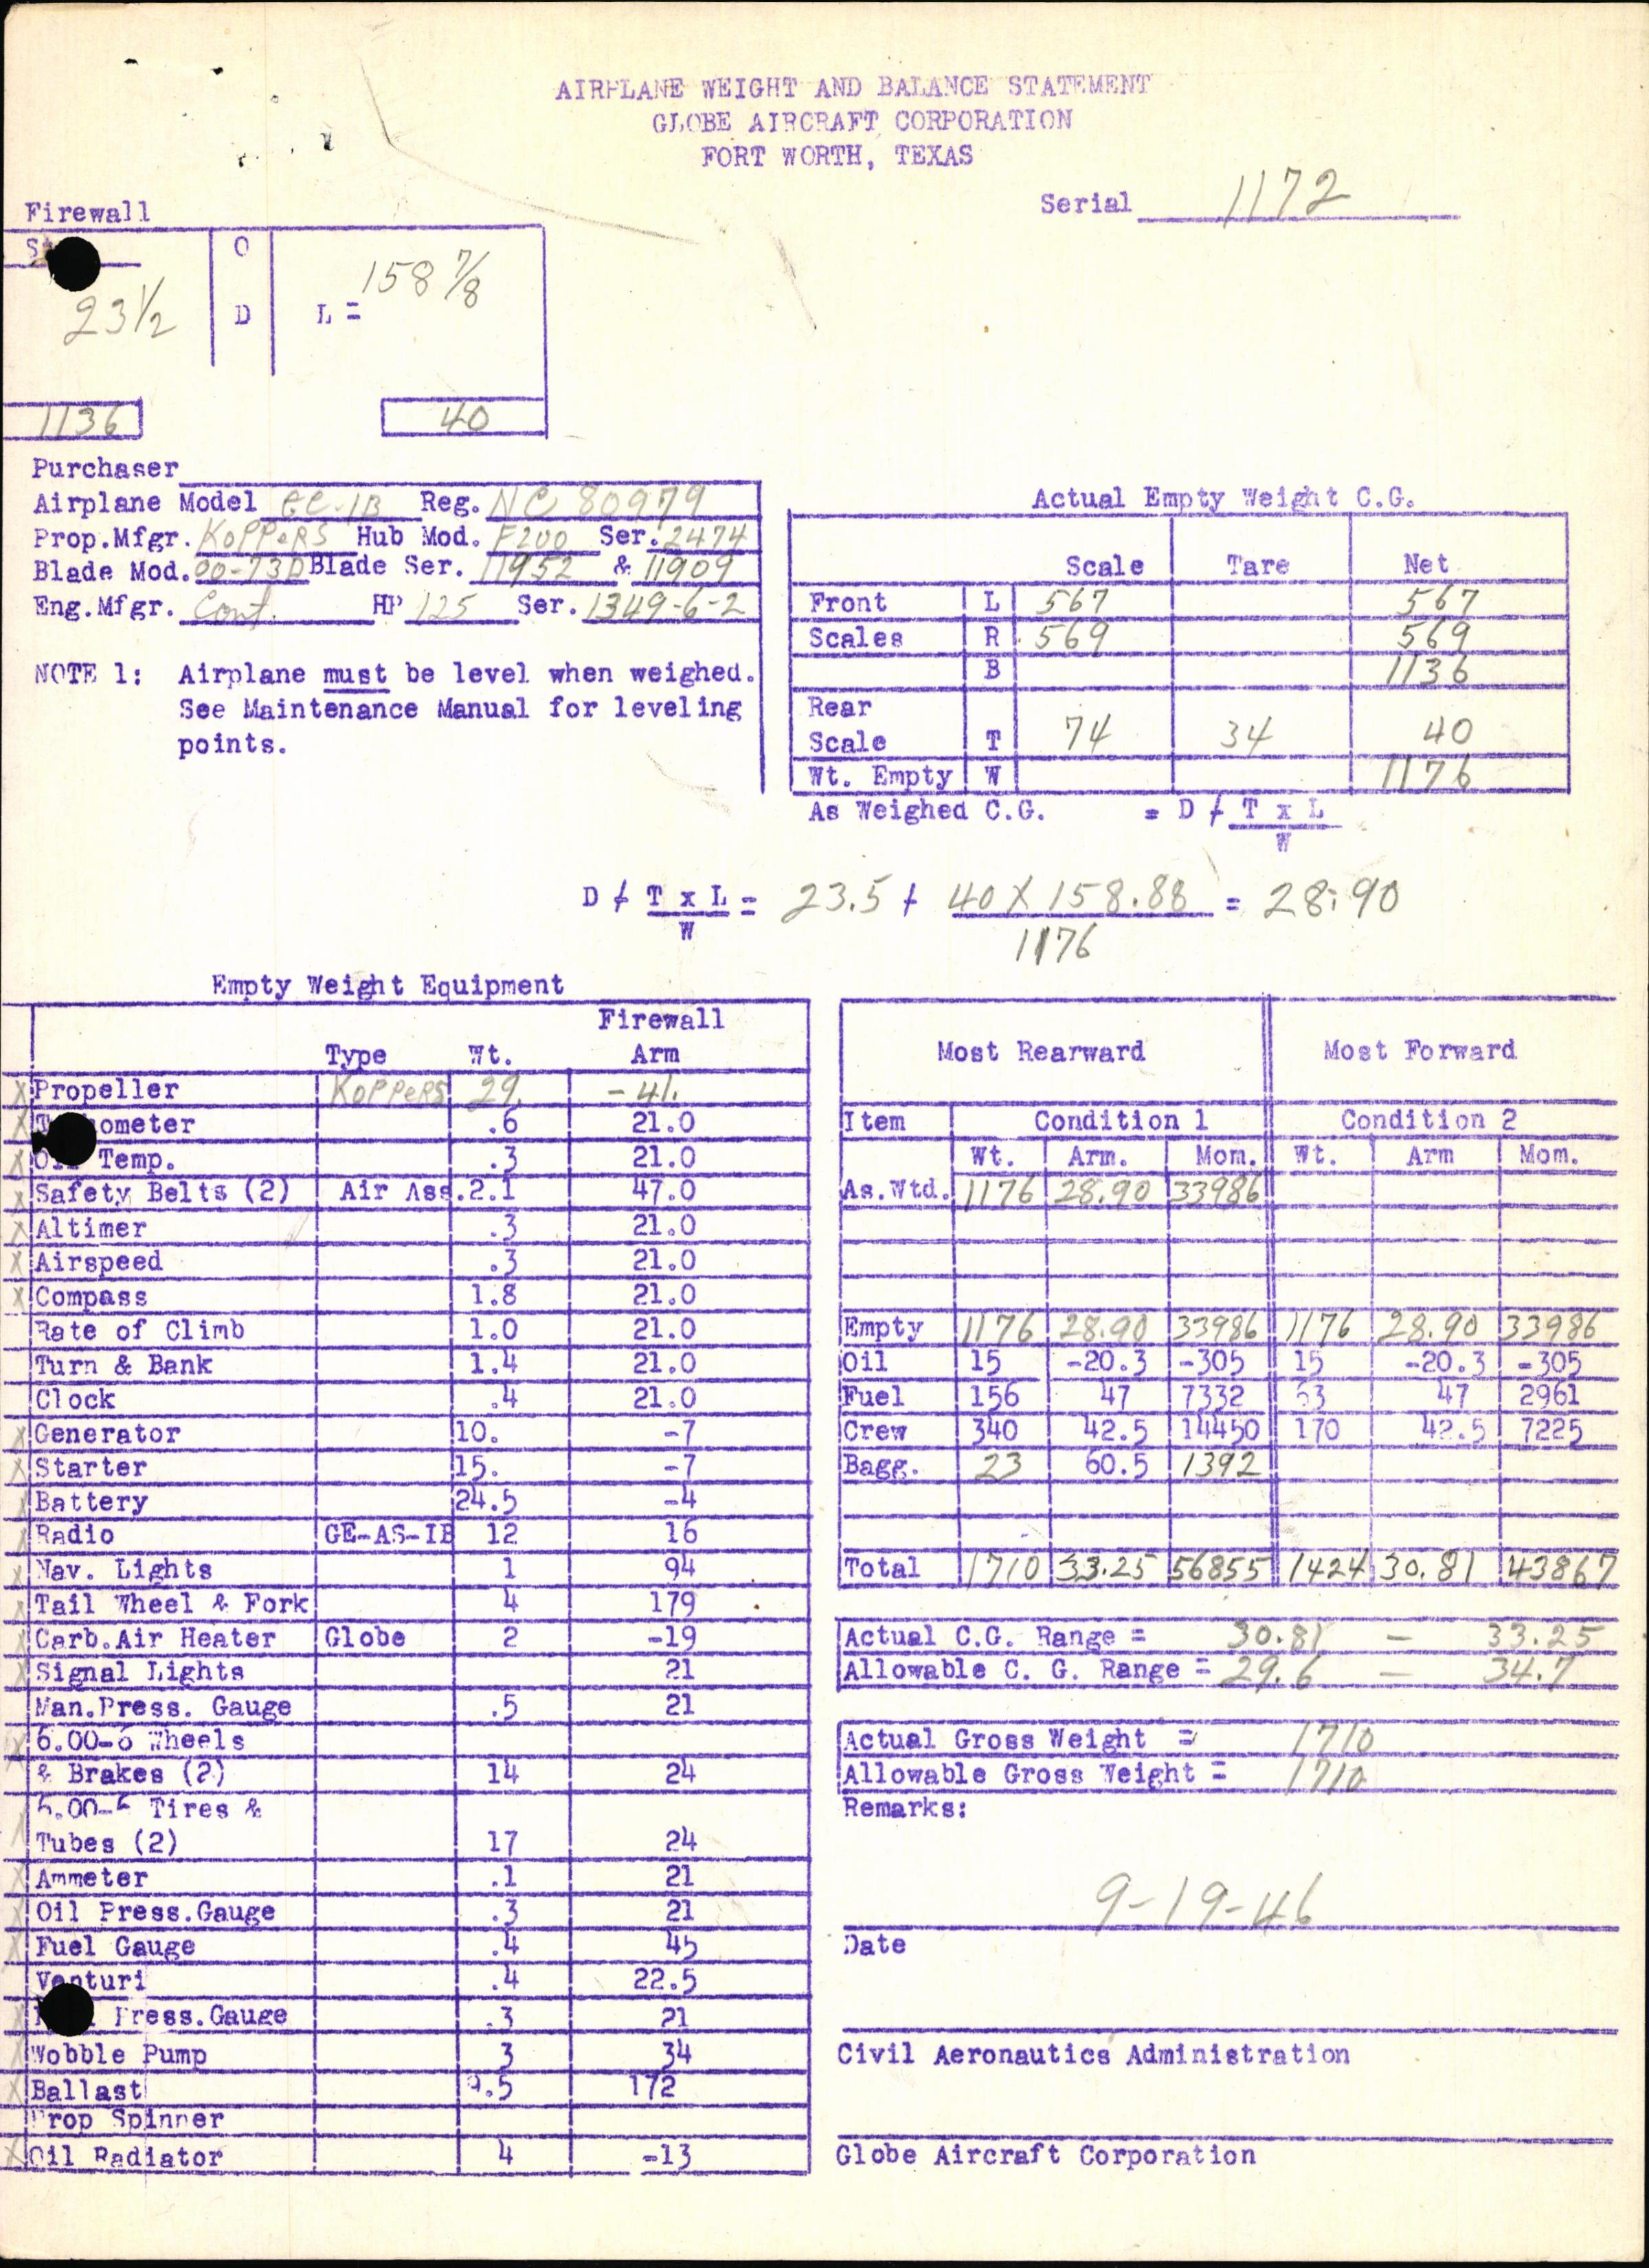 Sample page 7 from AirCorps Library document: Technical Information for Serial Number 1172